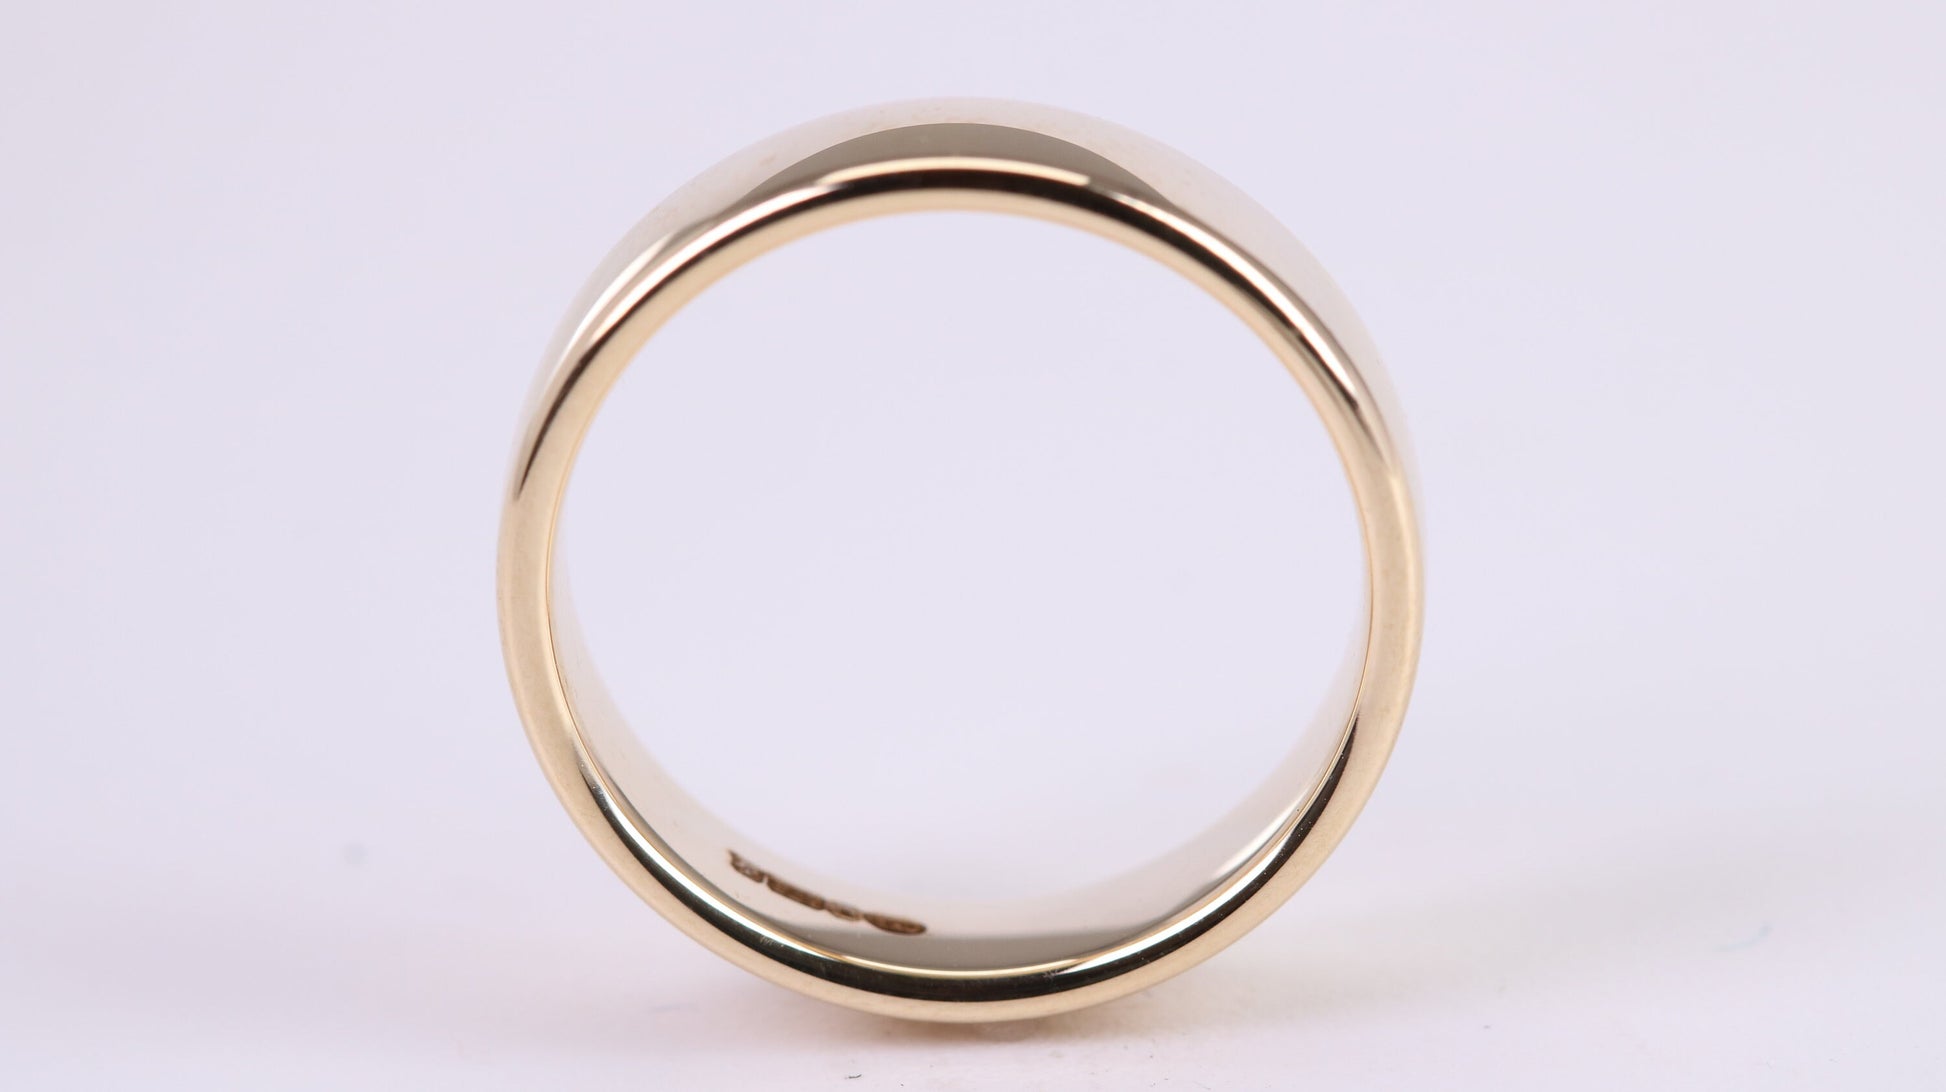 5 mm Wide Simple Comfort Court Profile Wedding Band, Made from Solid Yellow Gold, British Hallmarked